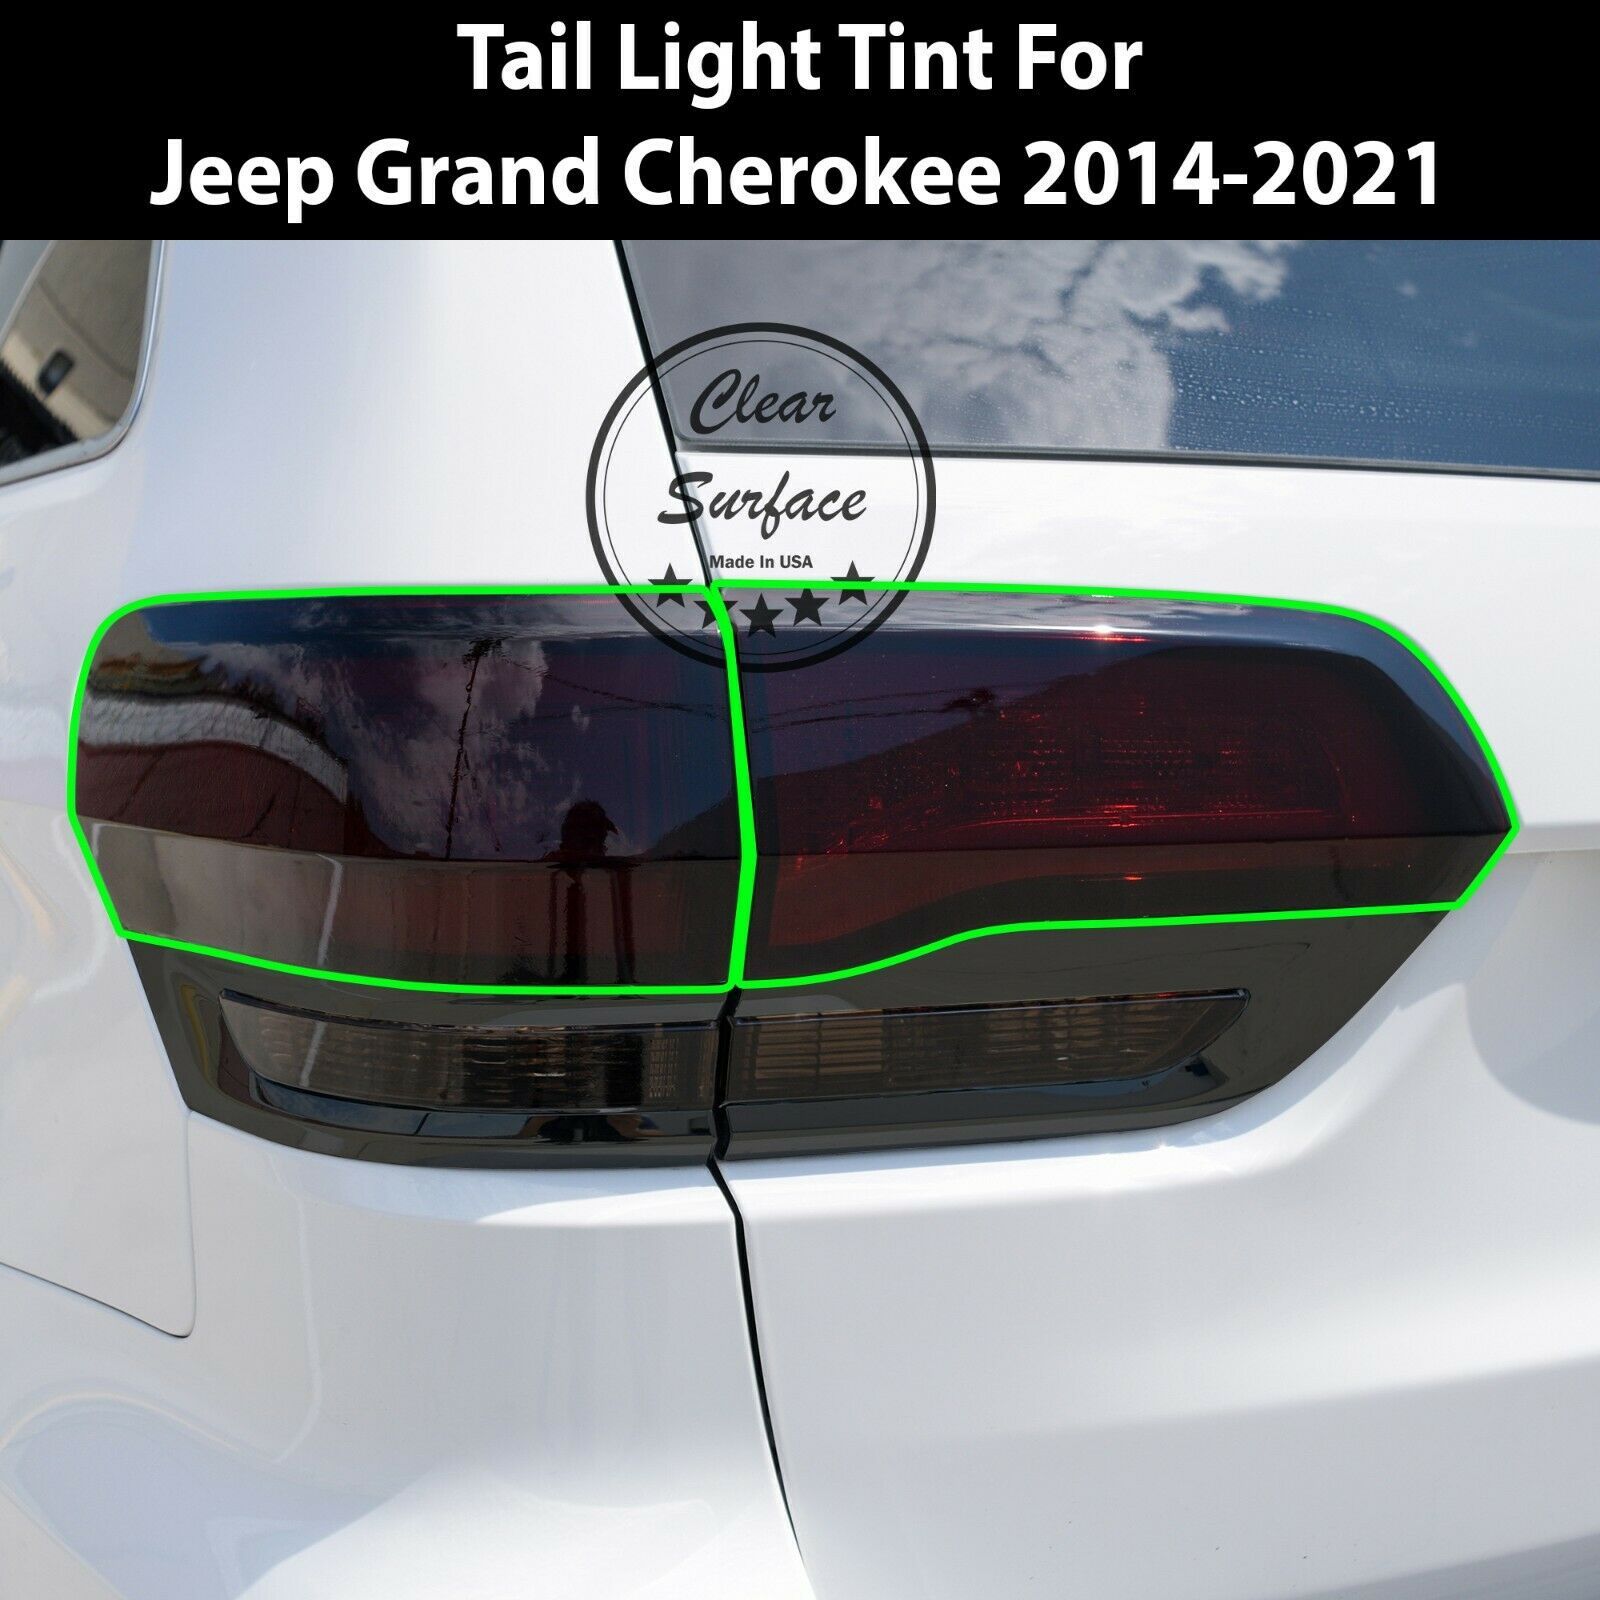 Primary image for Fits 2014-2021 Jeep Grand Cherokee Tail Light Taillight Overlay Tint Cover